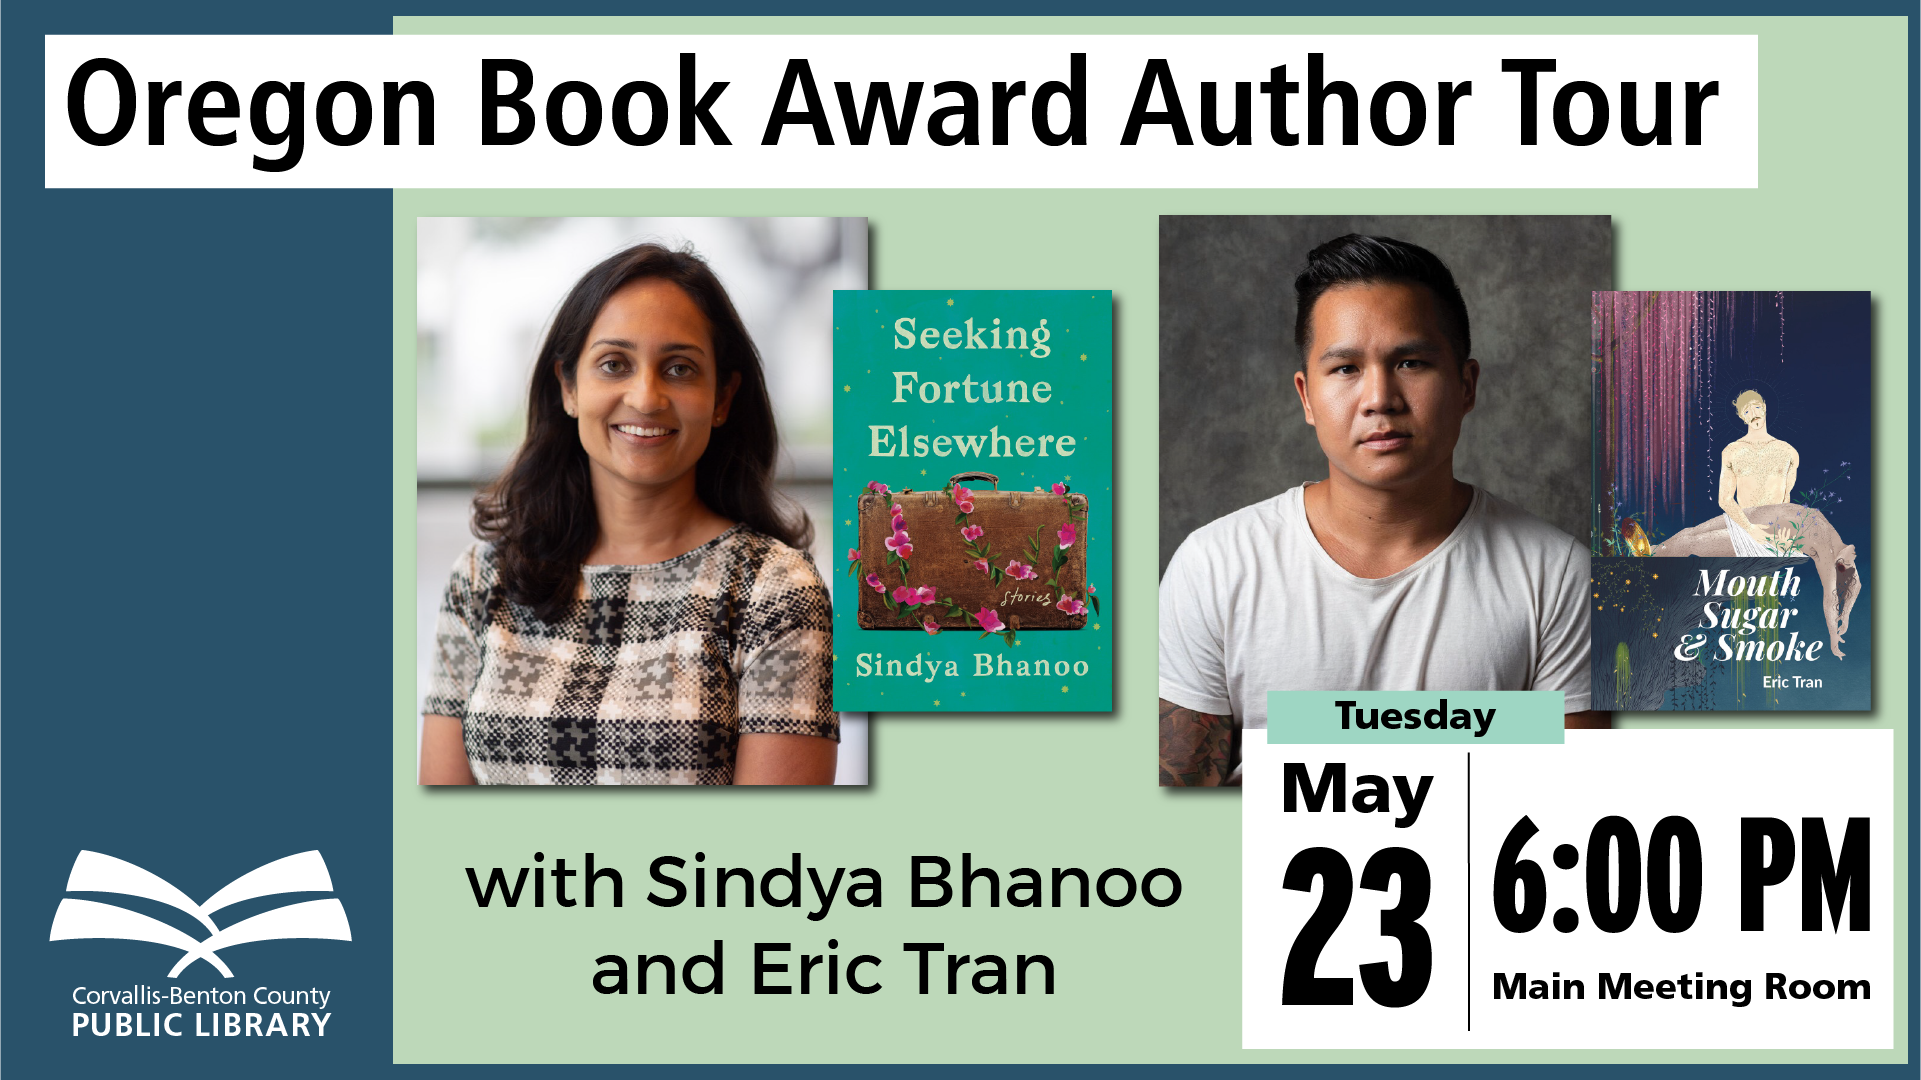 Oregon Book Award Author Tour with Sindya Bhanoo and Eric Tran, May 23 at 6 PM in the Main Meeting Room